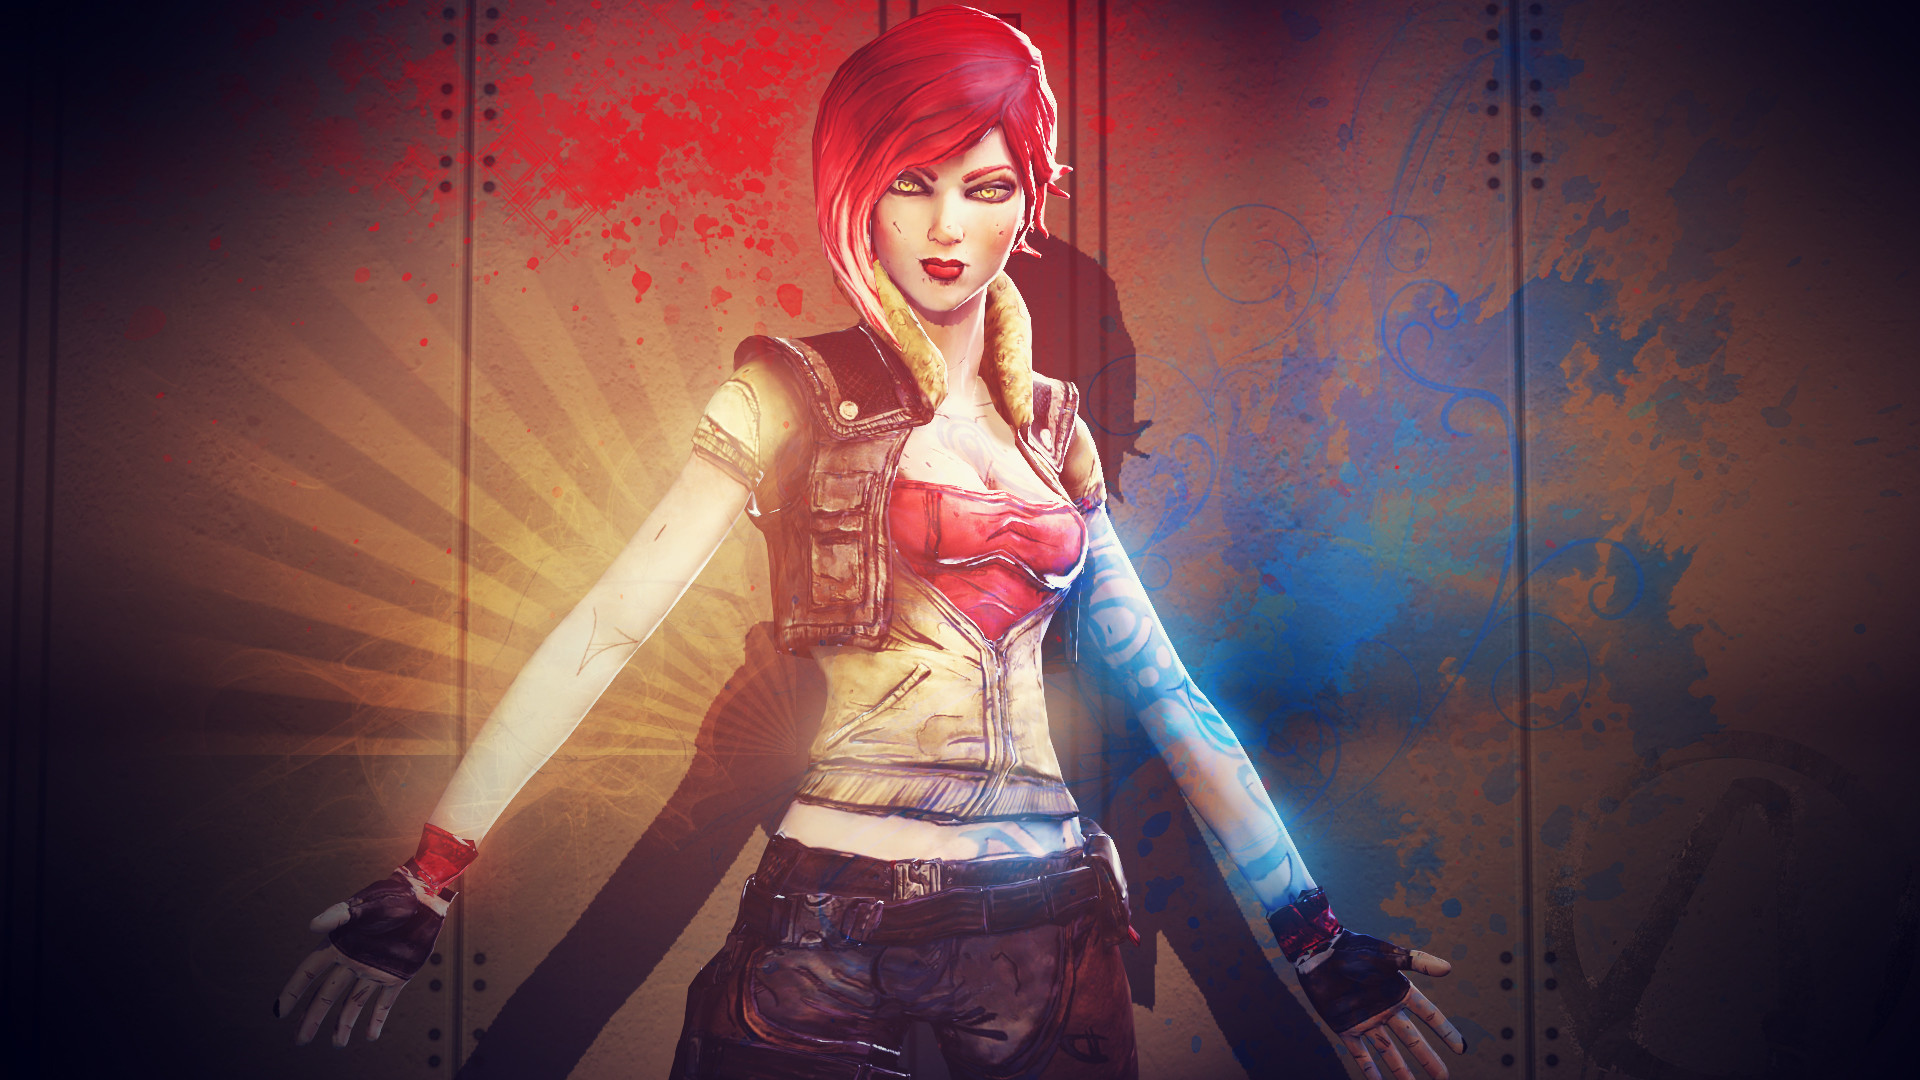 1920x1080 Borderlands 2 Background - Lilith by Mrjimjamjamie Borderlands 2 Background  - Lilith by Mrjimjamjamie